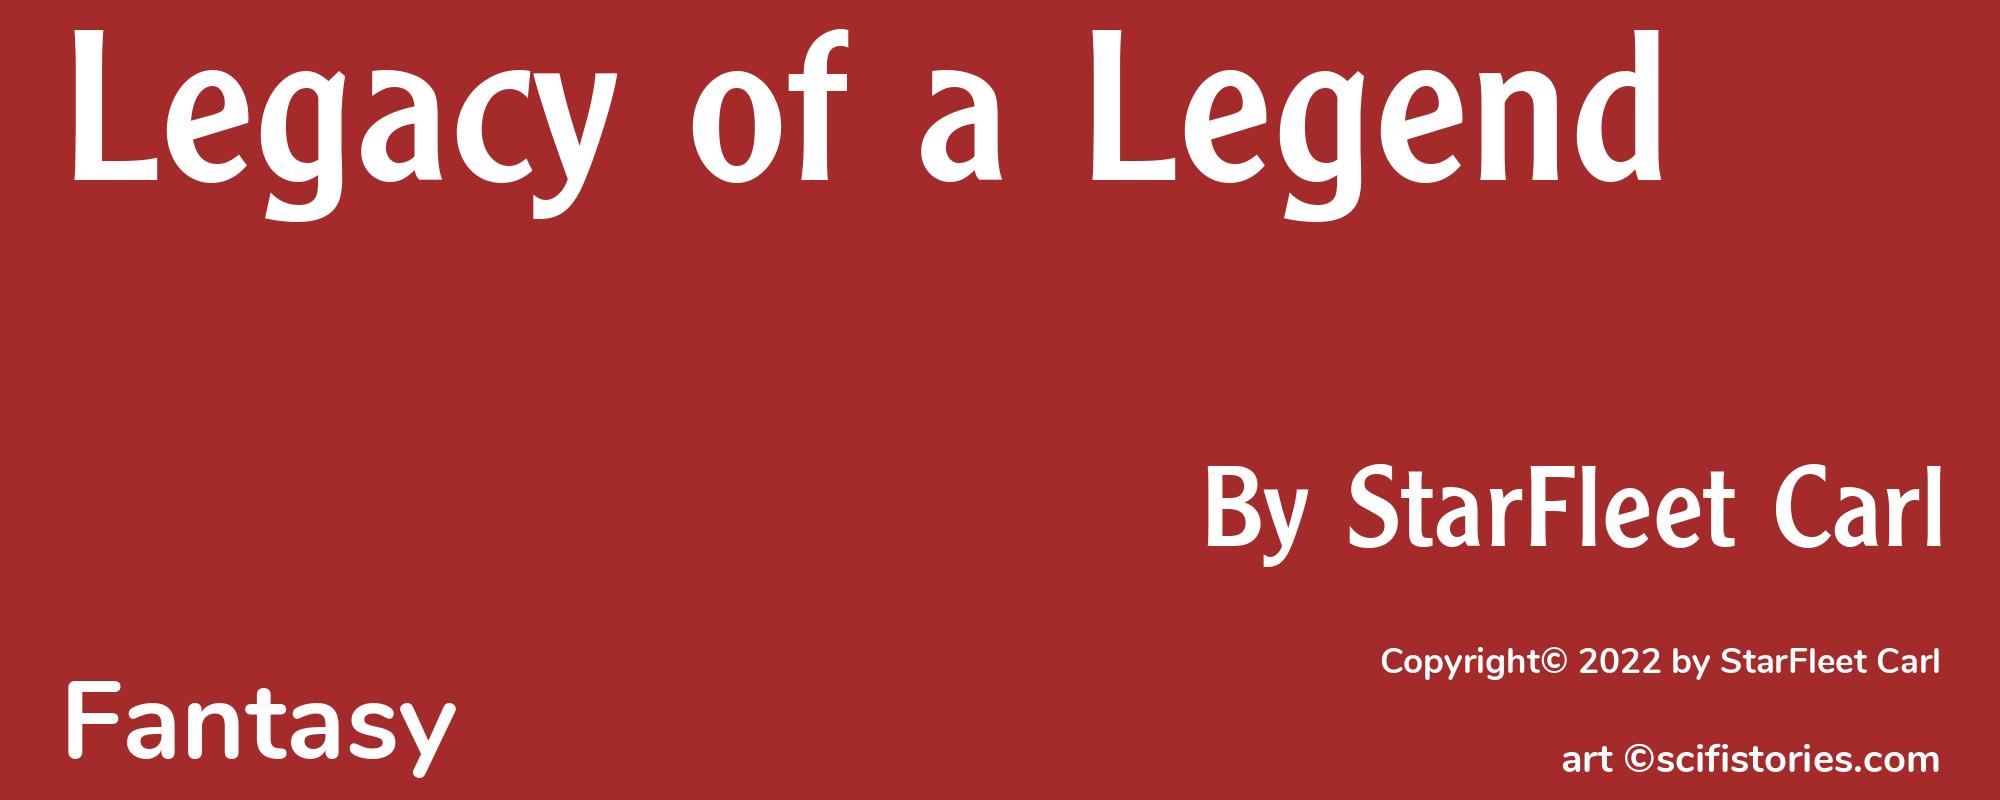 Legacy of a Legend - Cover